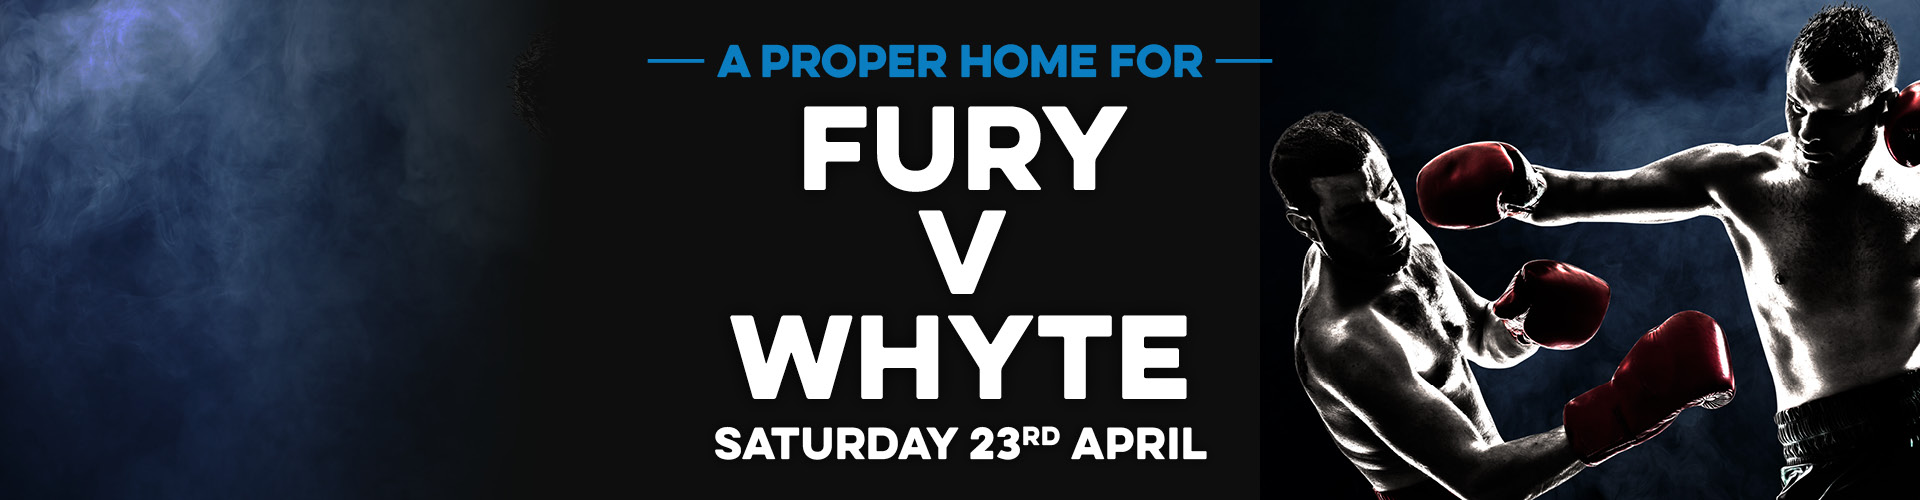 Watch Fury vs Whyte live in Derby